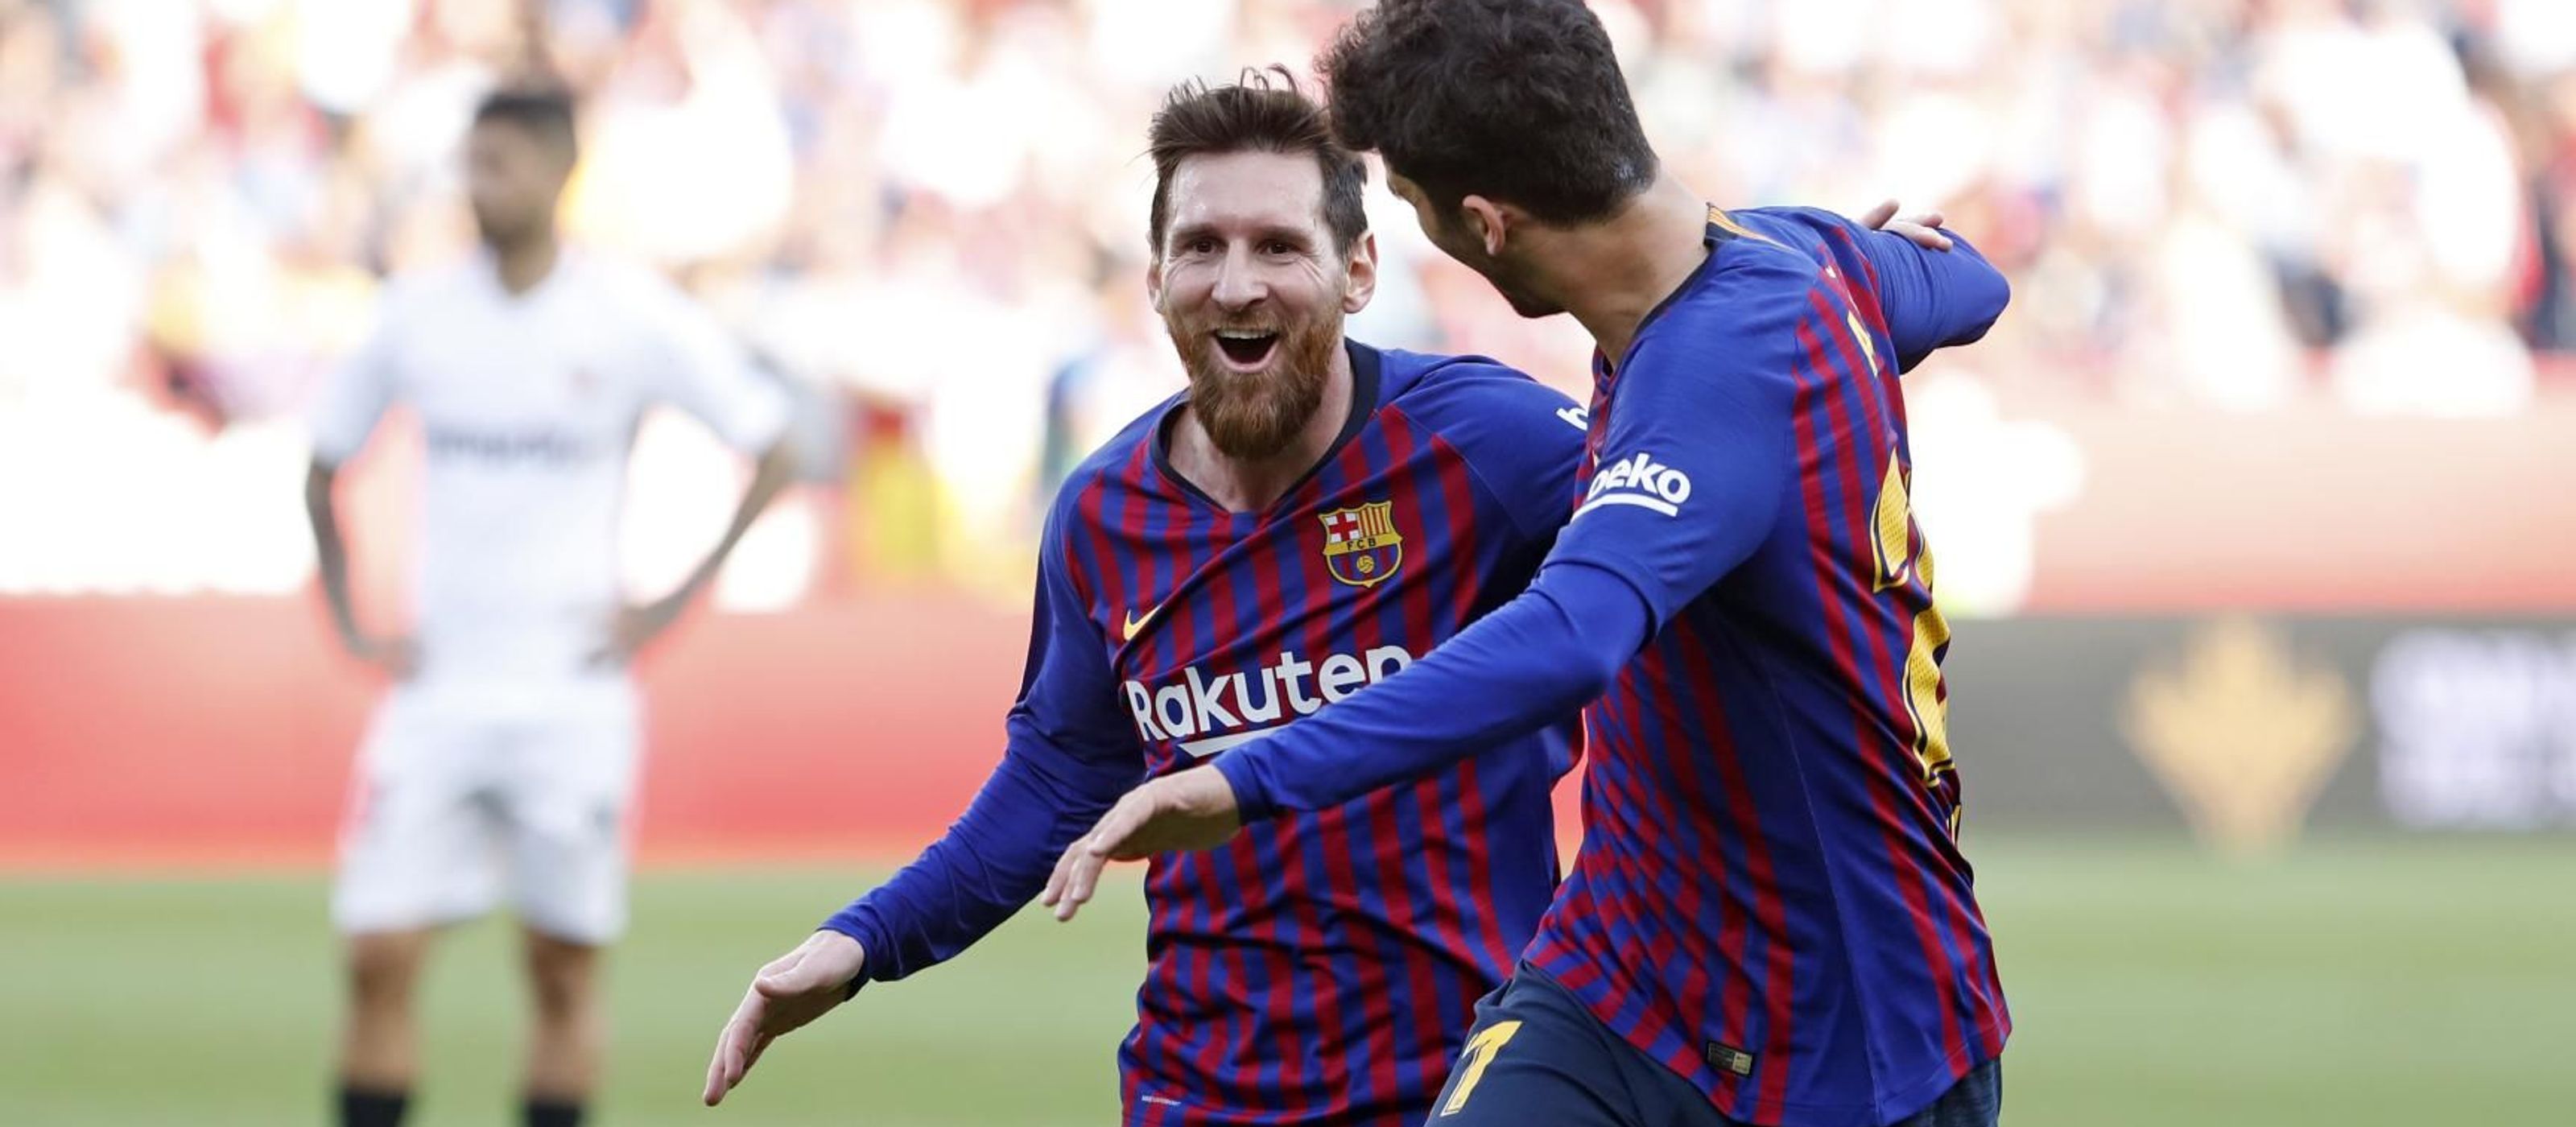 Lionel Messi’s stunning hat-trick against his favourite opponent, and Luis Suarez’s late goal secured the points for the Blaugrana who twice went behind at the Ramón Sánchez-Pizjuán (by FCB)